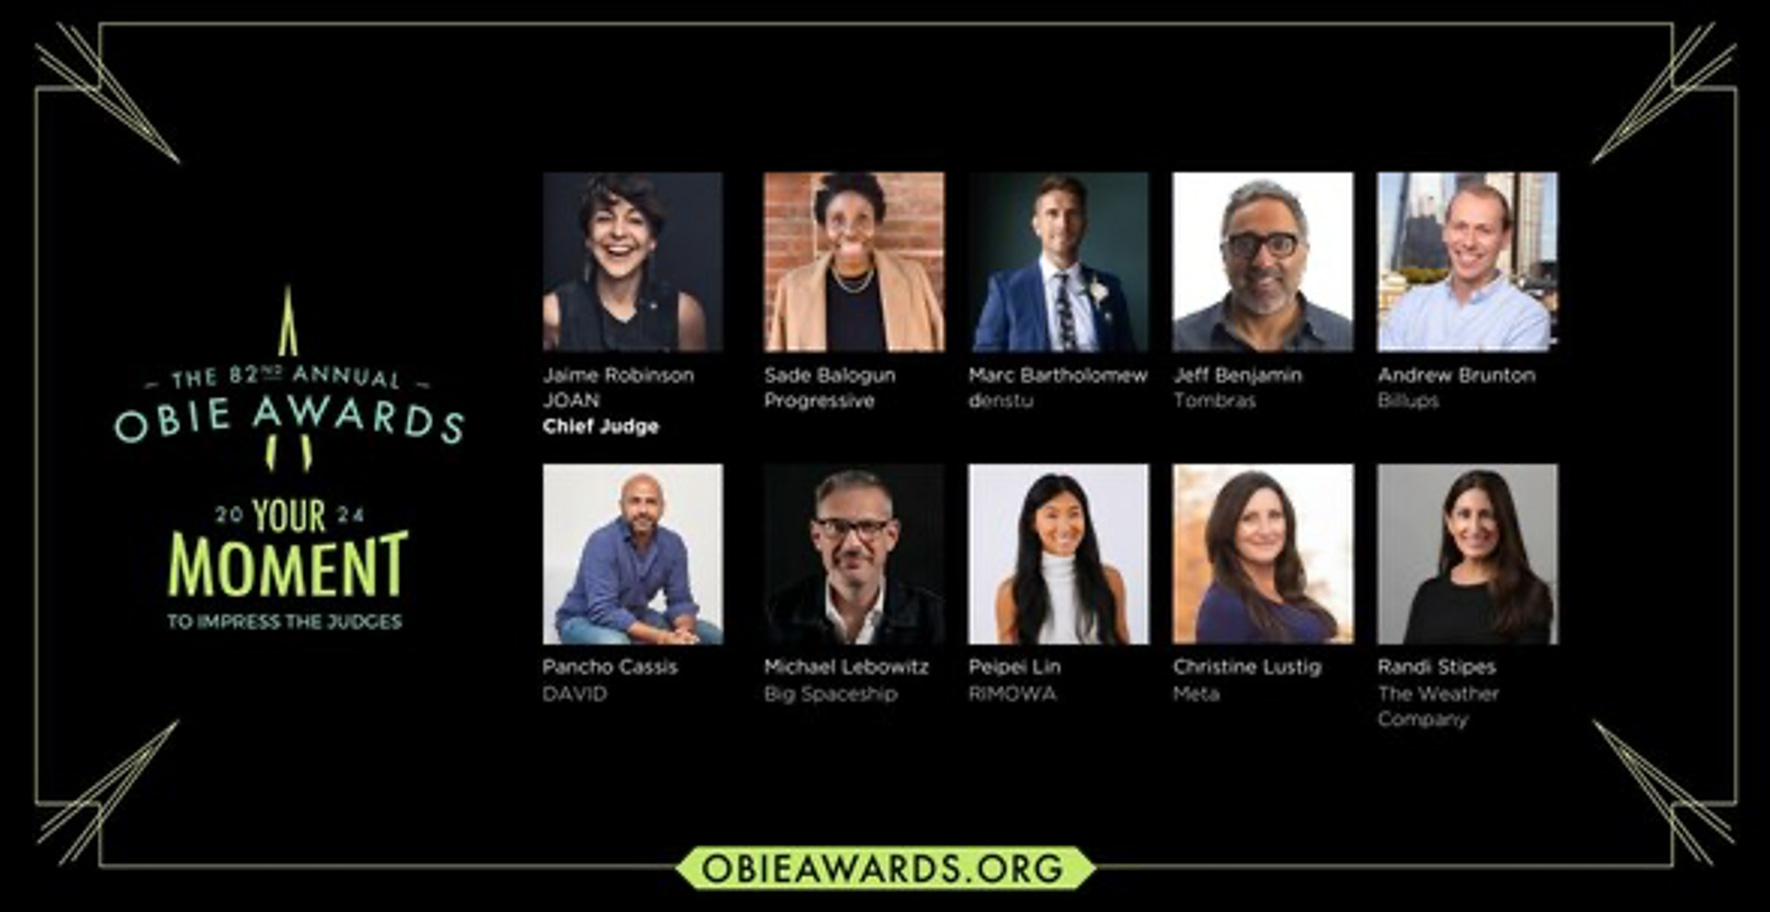 The 82nd Annual OBIE Awards Jury